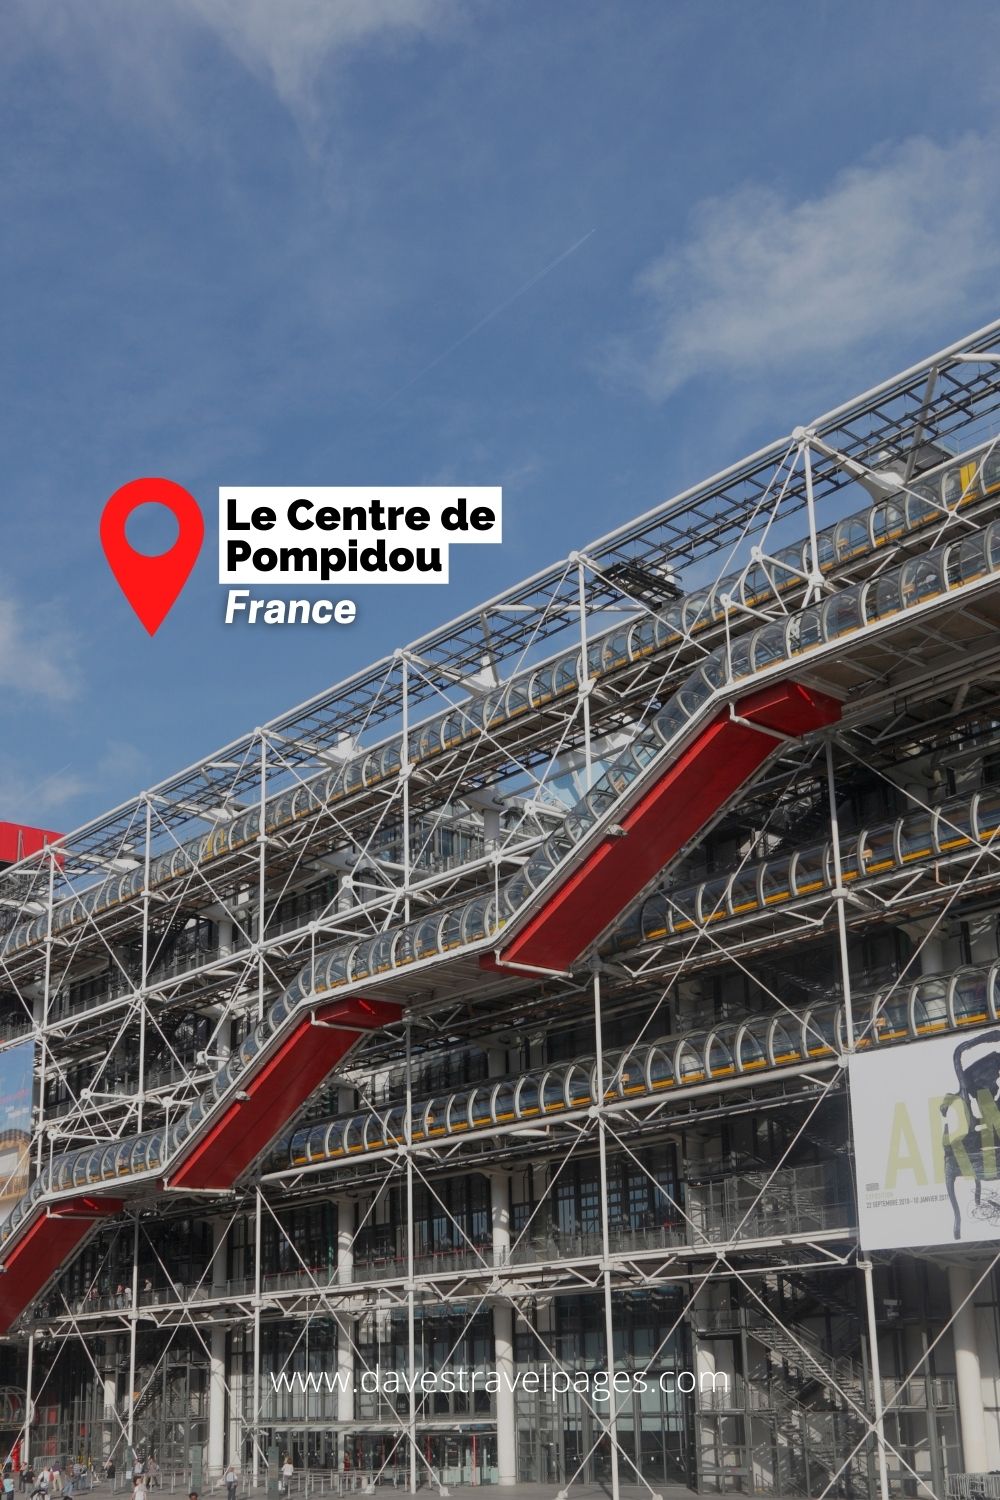 Le Centre de Pompidou - One of the most famous landmarks in Europe